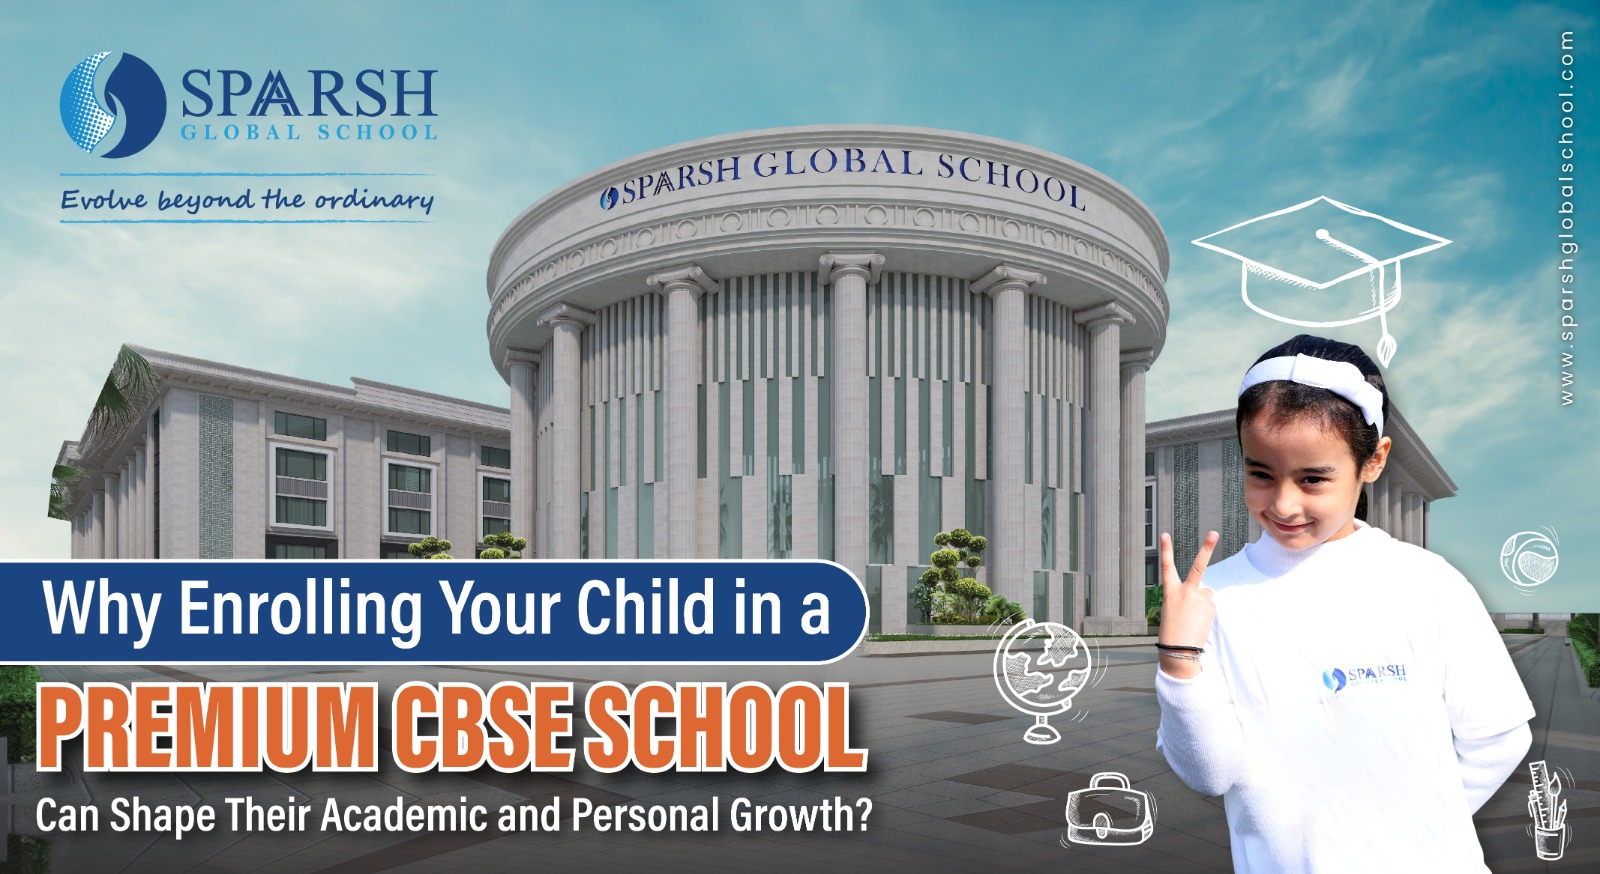 Why Enrolling Your Child in a Premium CBSE School Can Shape their Acade0mic and Personal Growth?